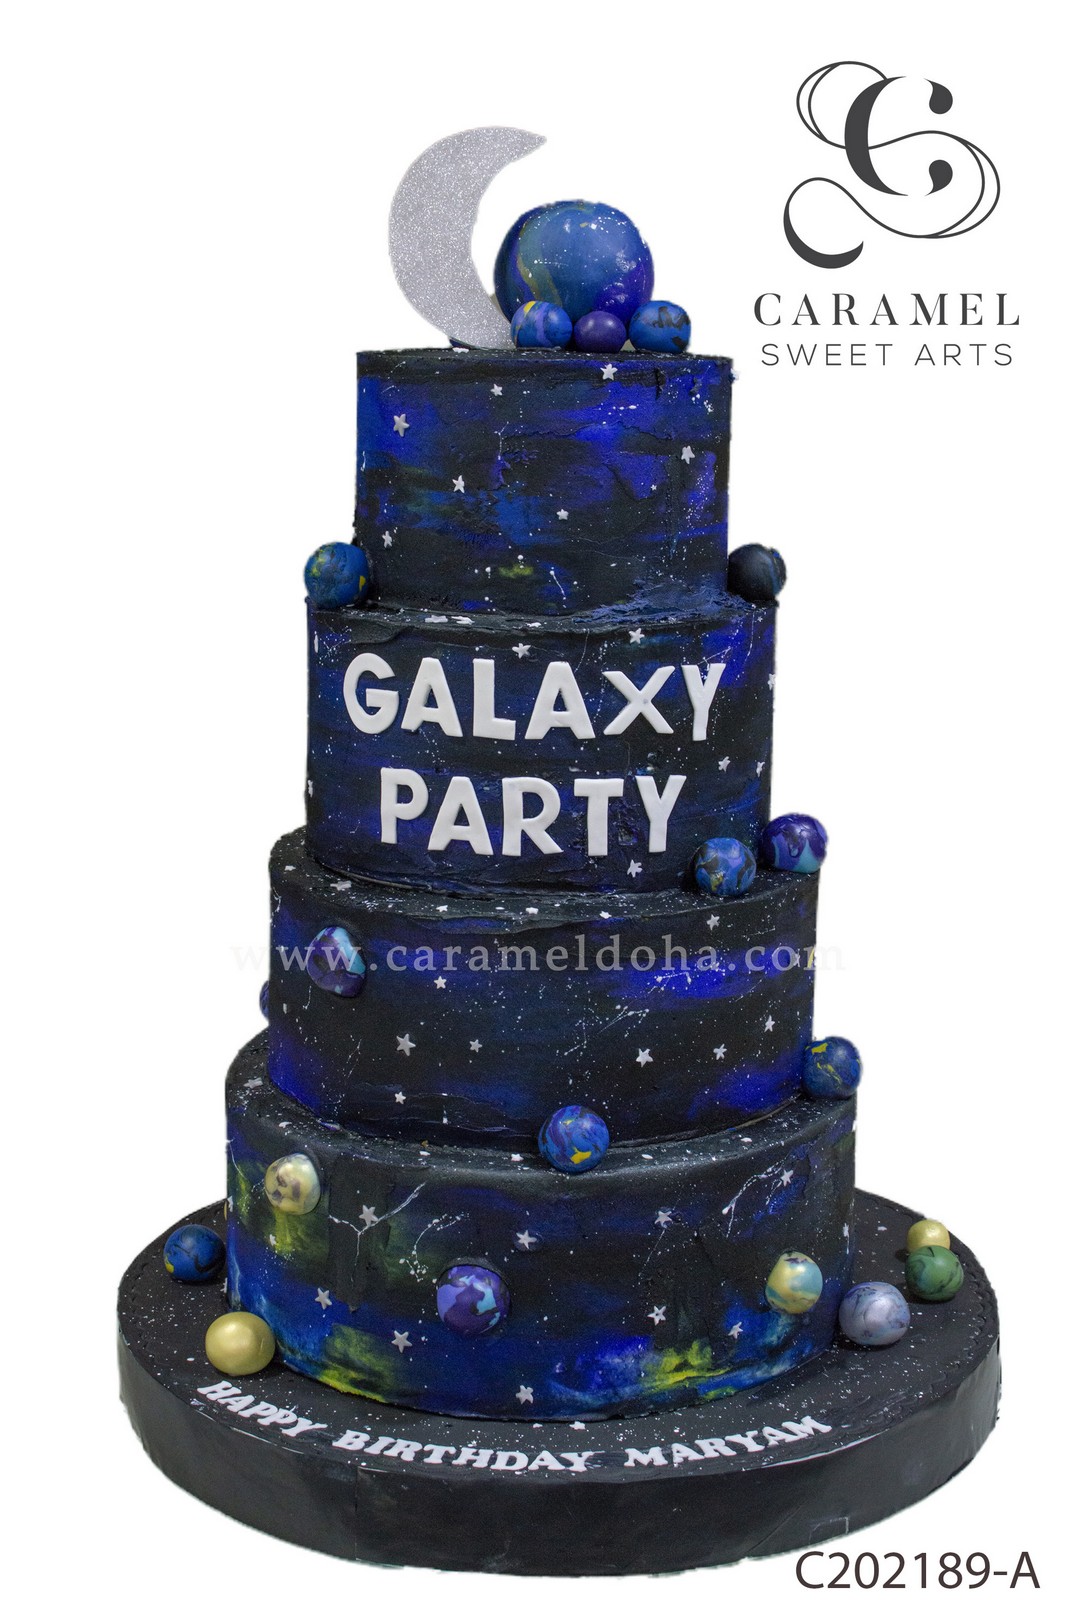 How to make a Galaxy Theme Birthday Cake - Simple & Easy Technique - YouTube